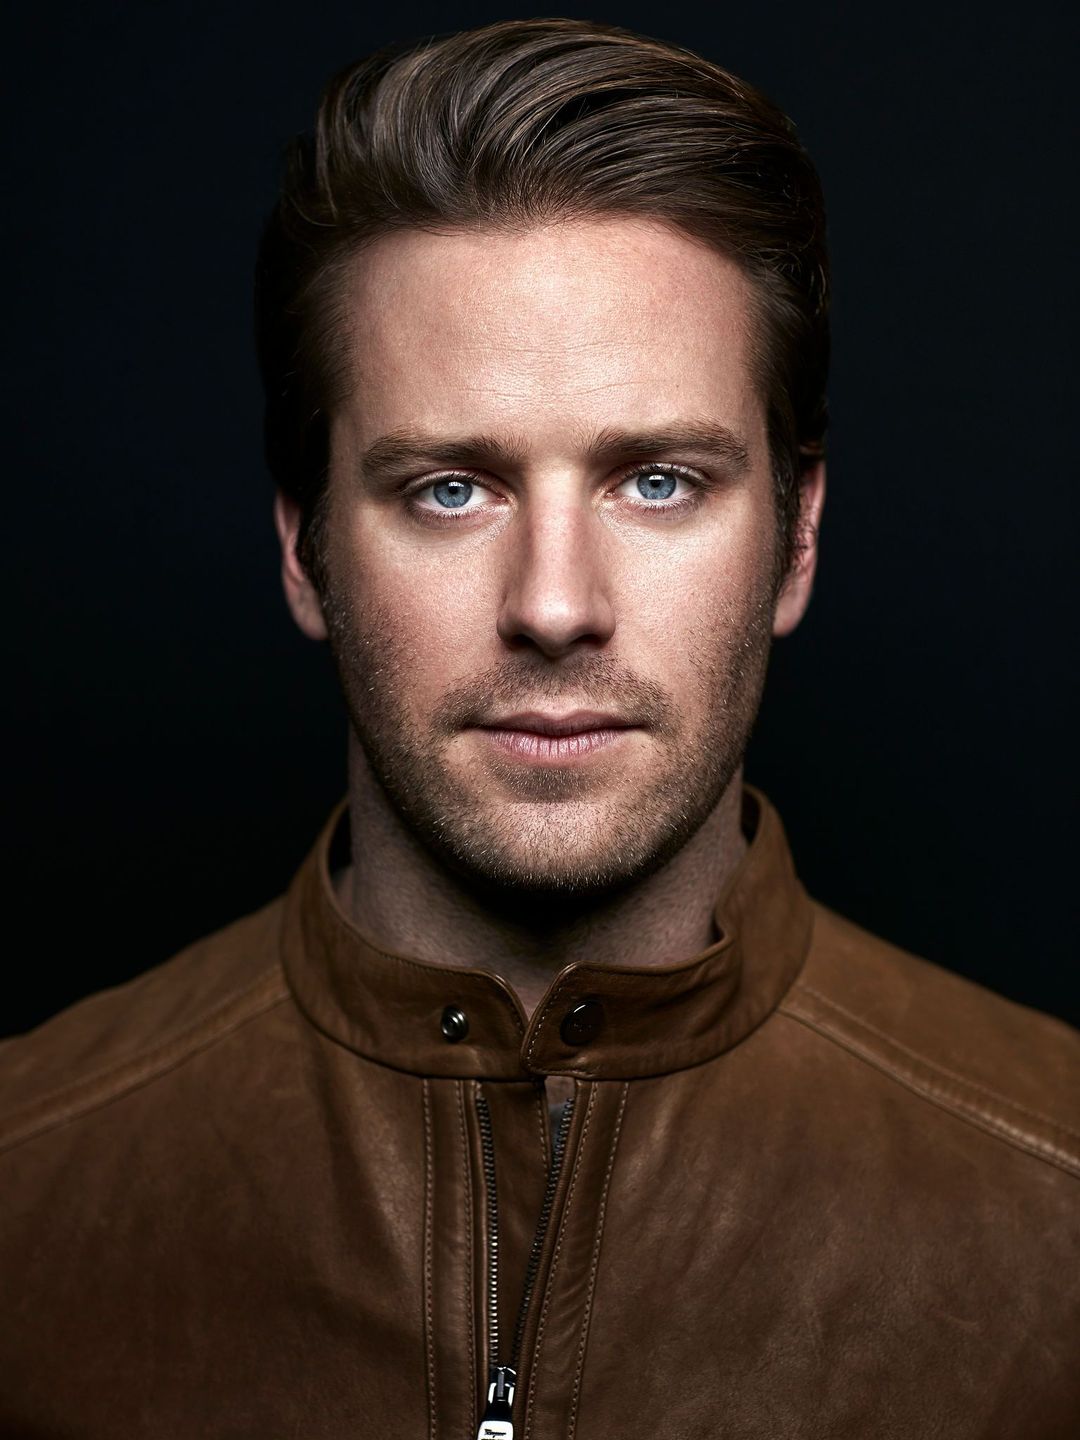 Armie Hammer personal traits